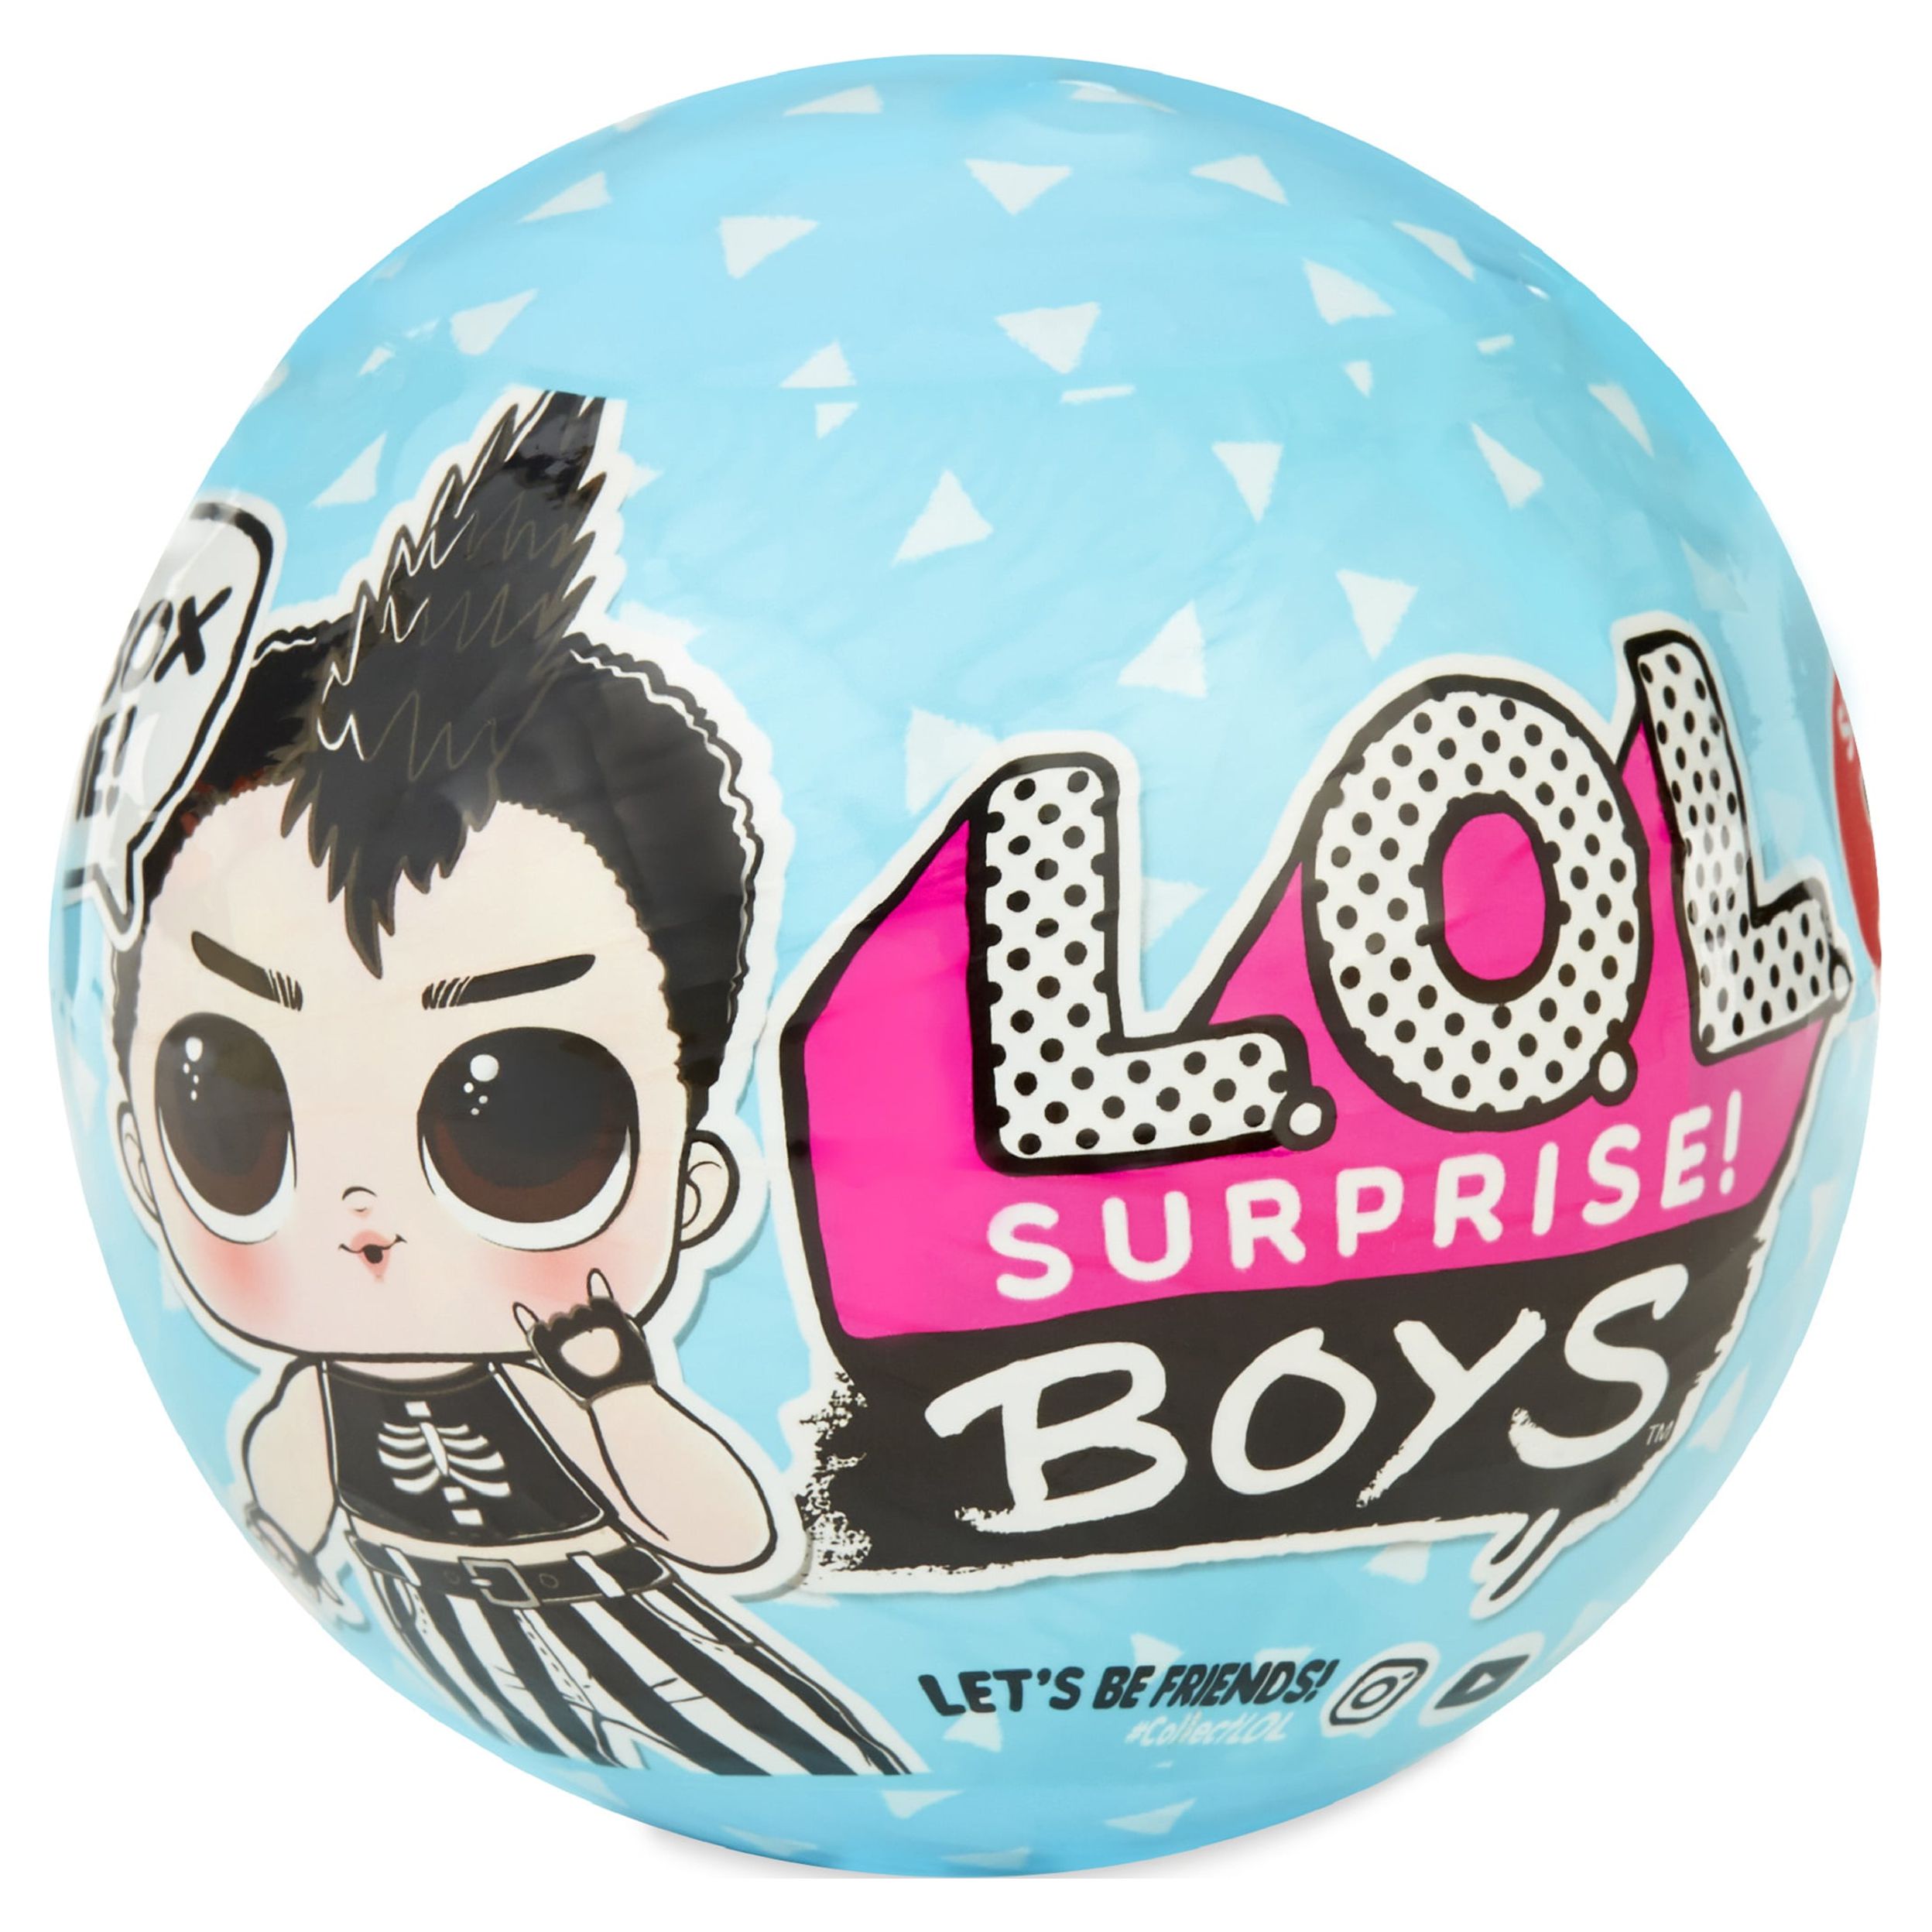 LOL Surprise Boys Dolls With 7 Surprises Including Outfit, Bottle, Accessory, Shoes, Doll, and More For Kids Ages 5-11 - image 1 of 7